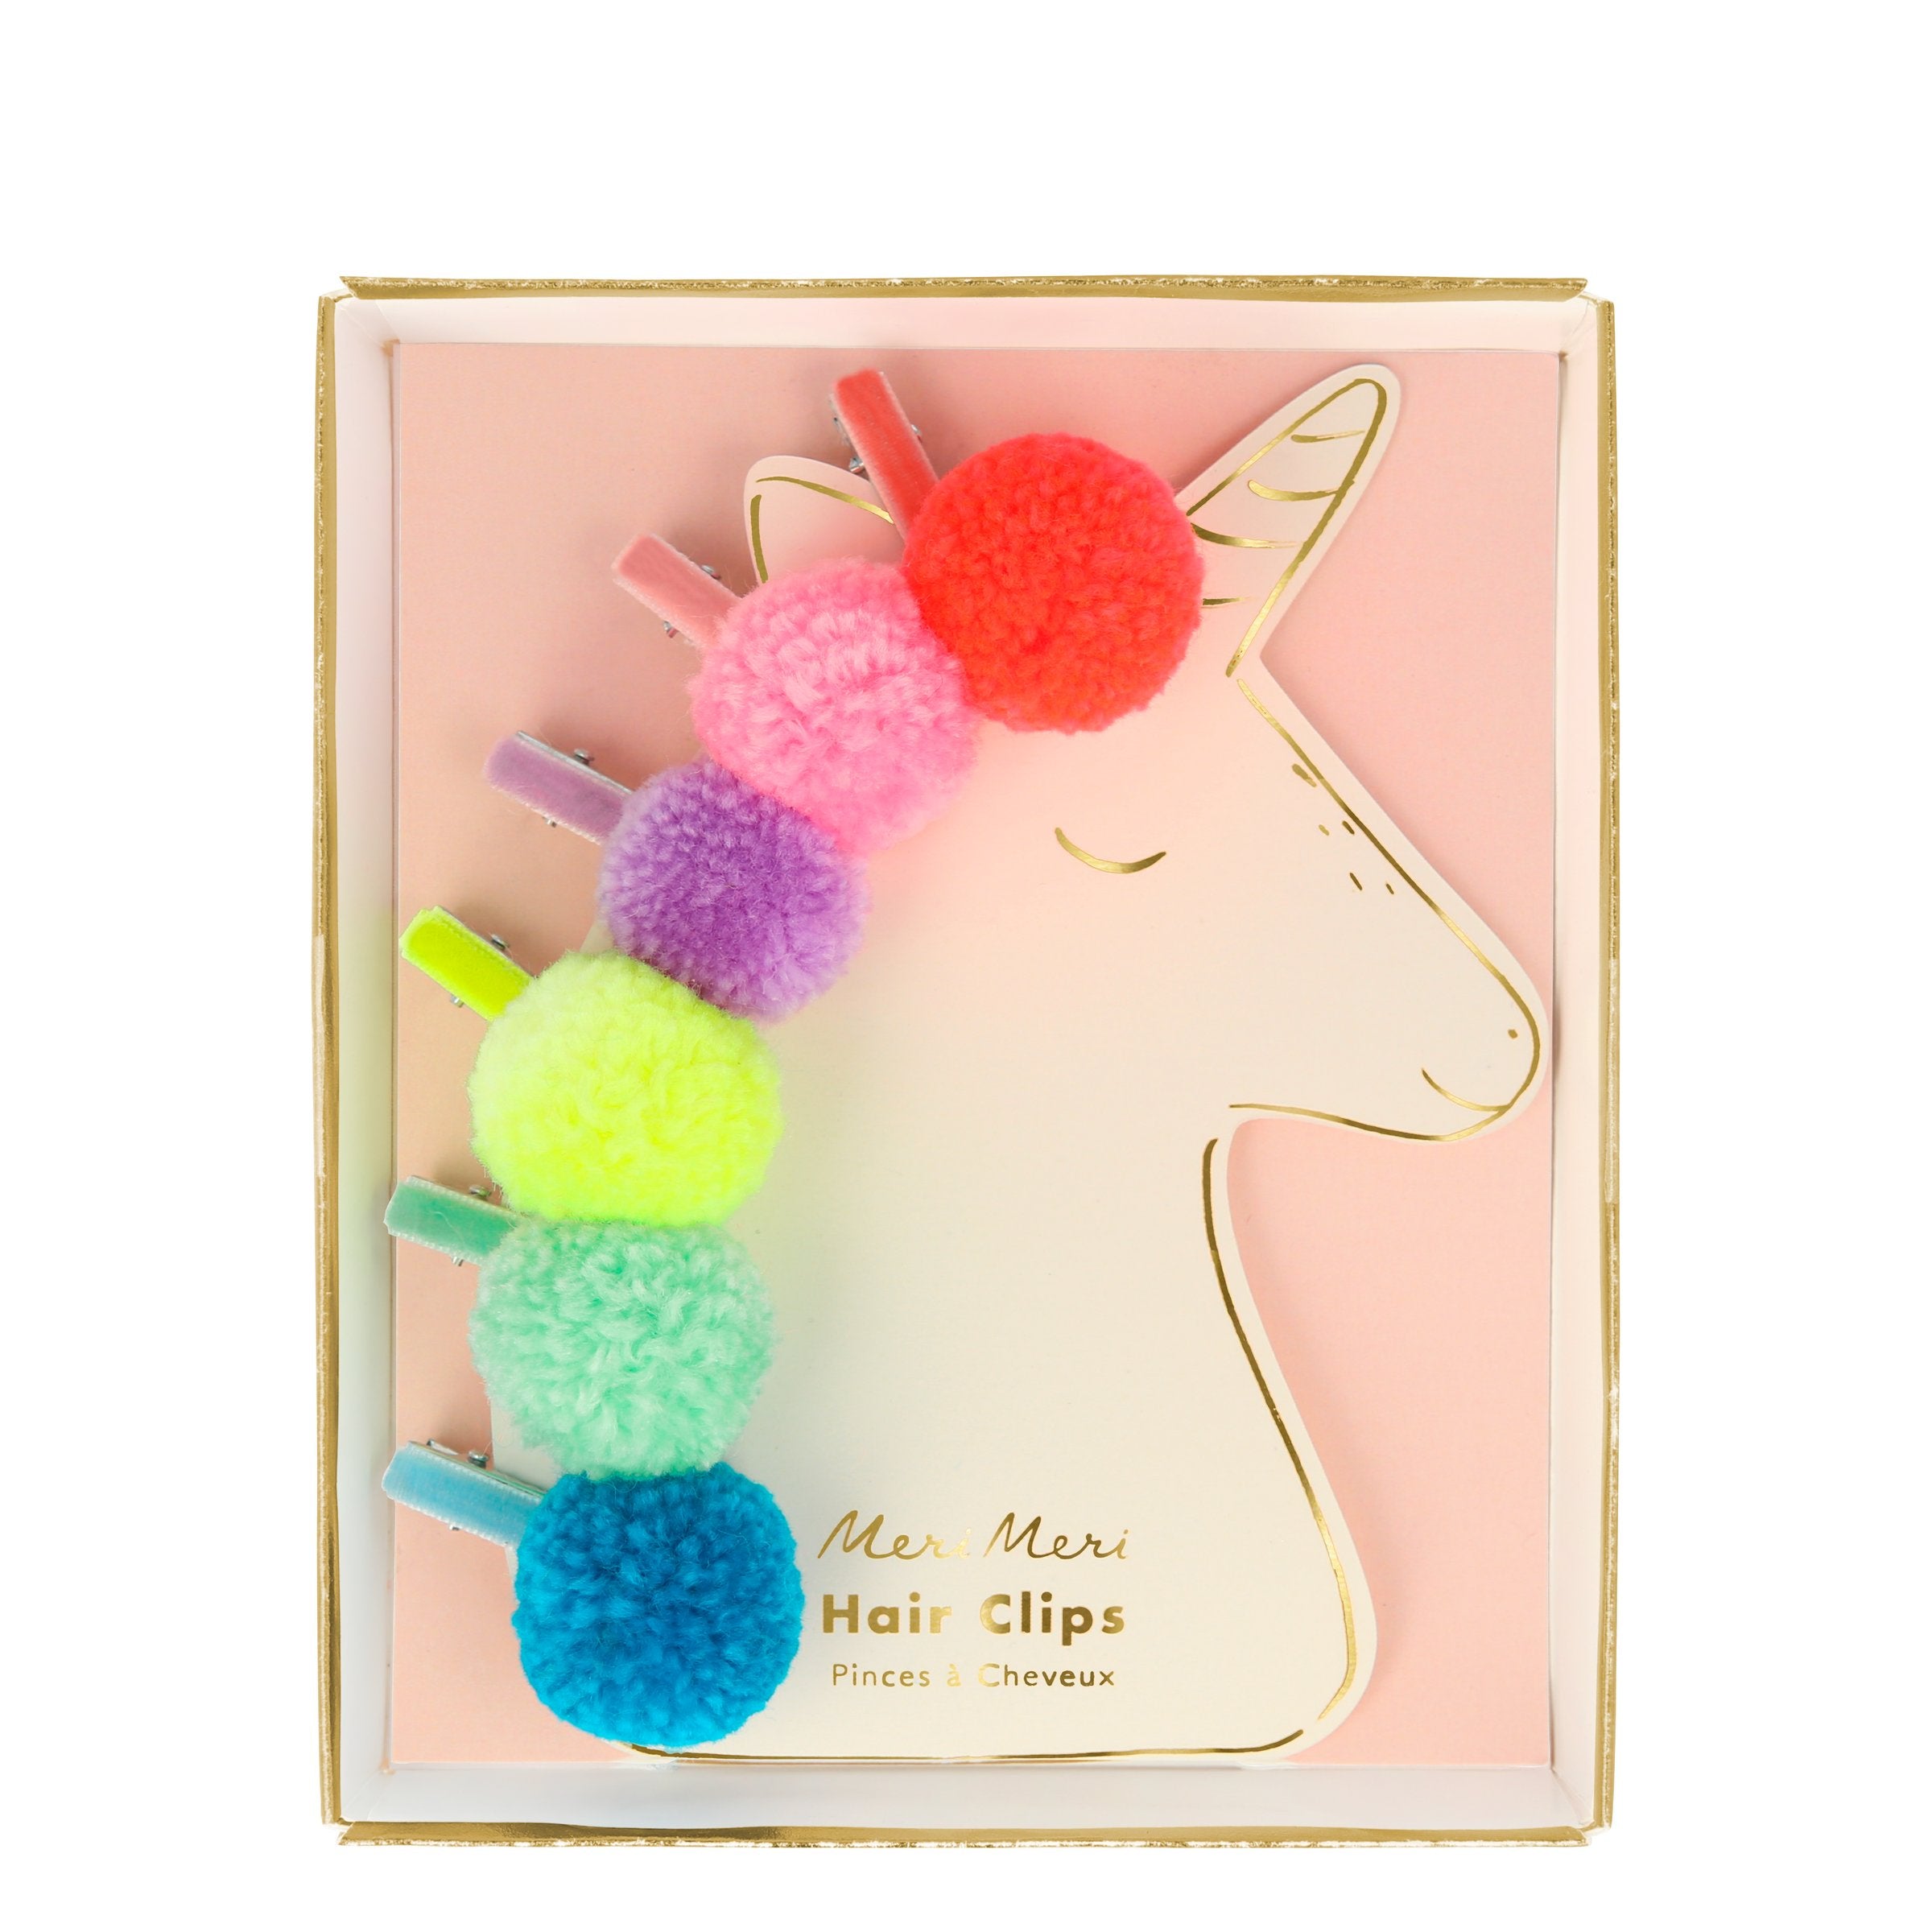 Our pompom hair clips are presented on a unicorn shaped card, the perfect gift for a unicorn themed party.